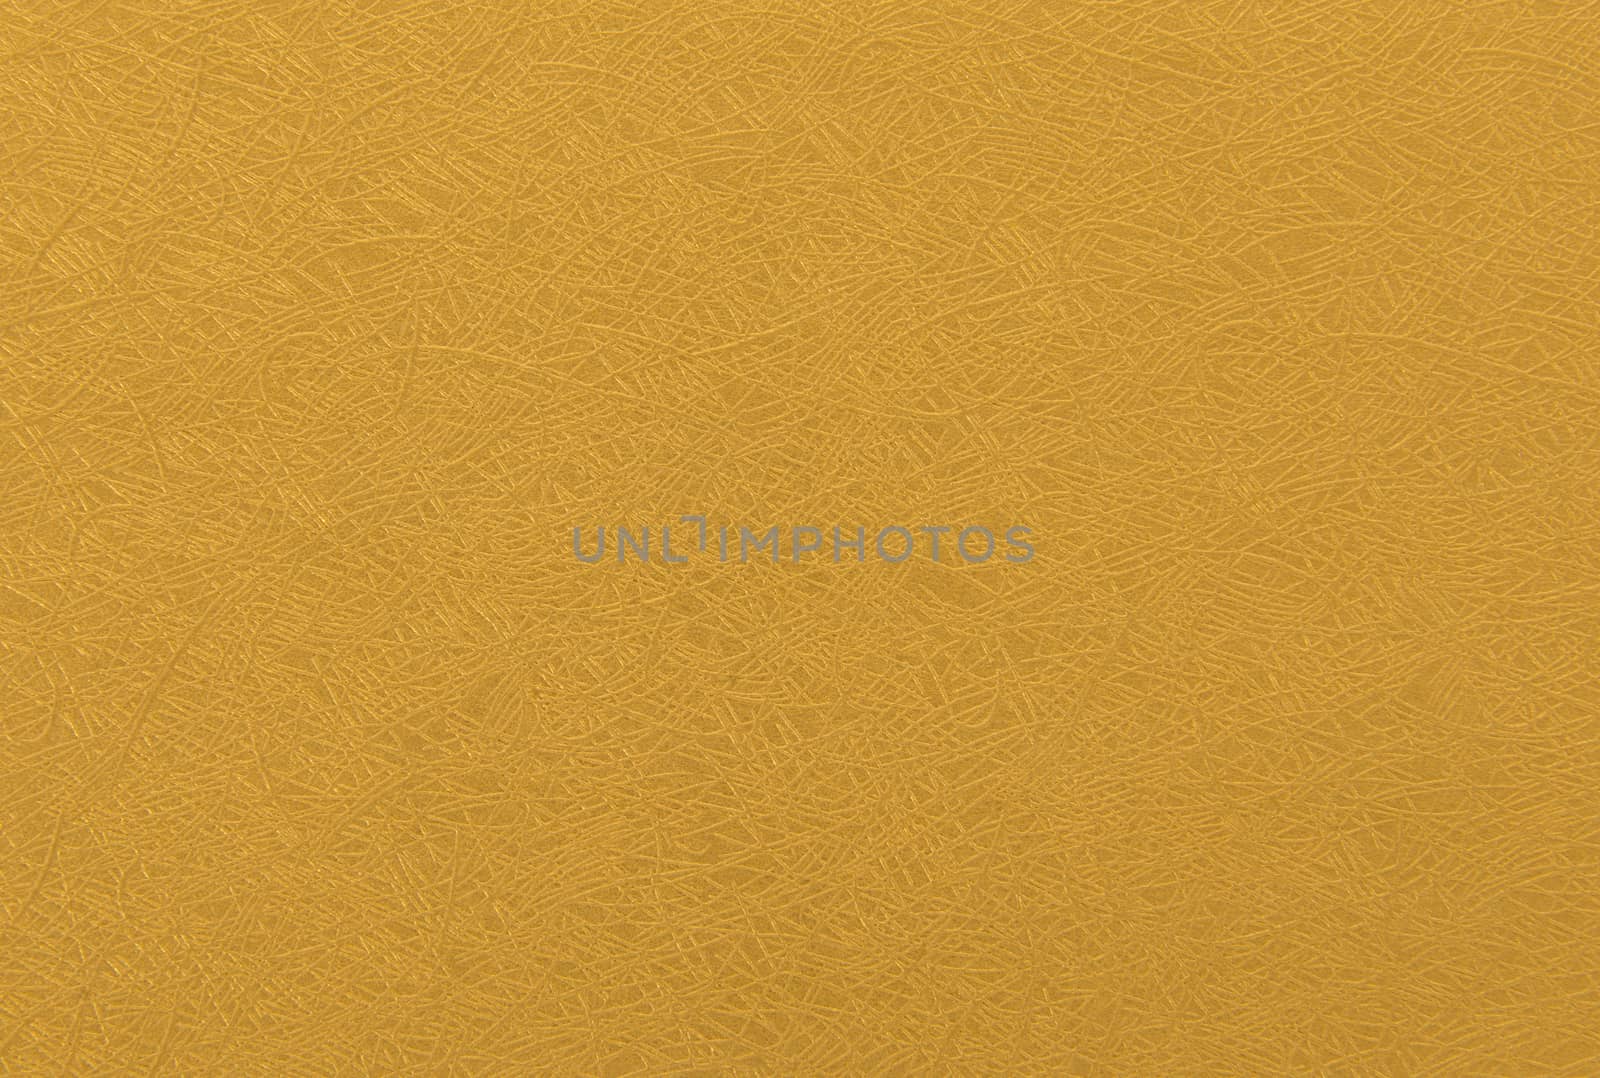 Gold paper for use as a background.